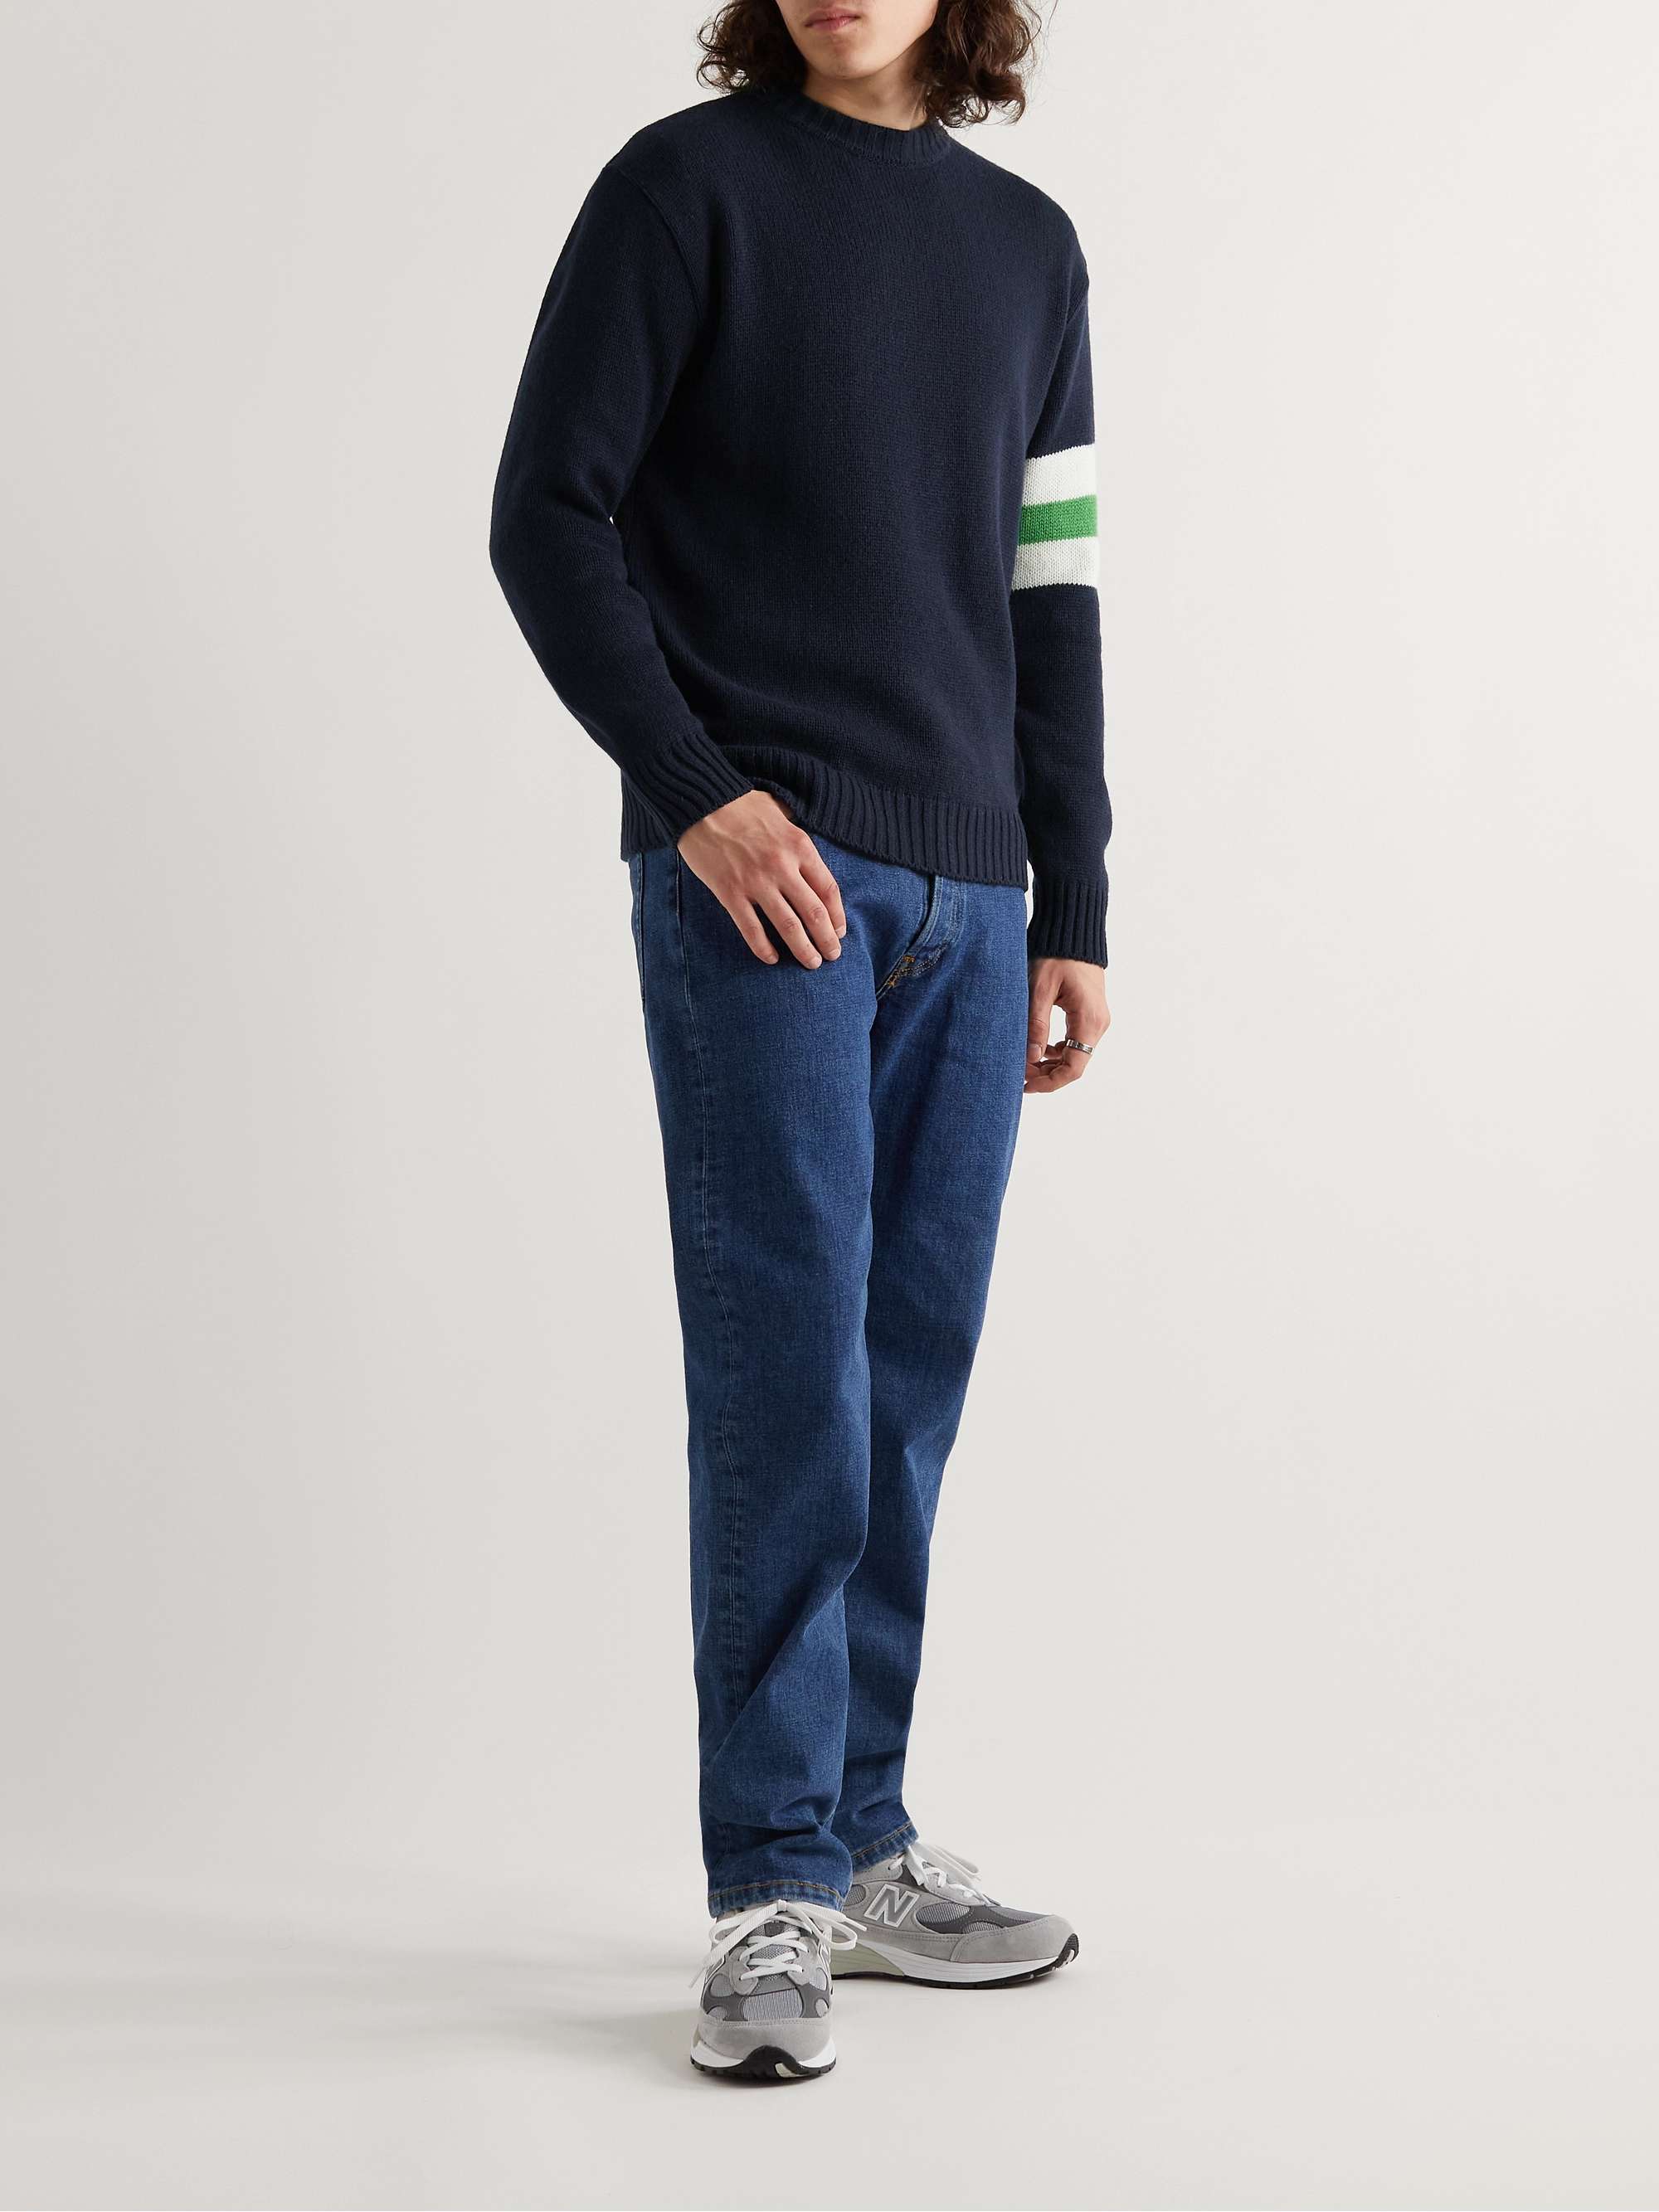 ANONYMOUS ISM Slim-Fit Striped Wool Sweater